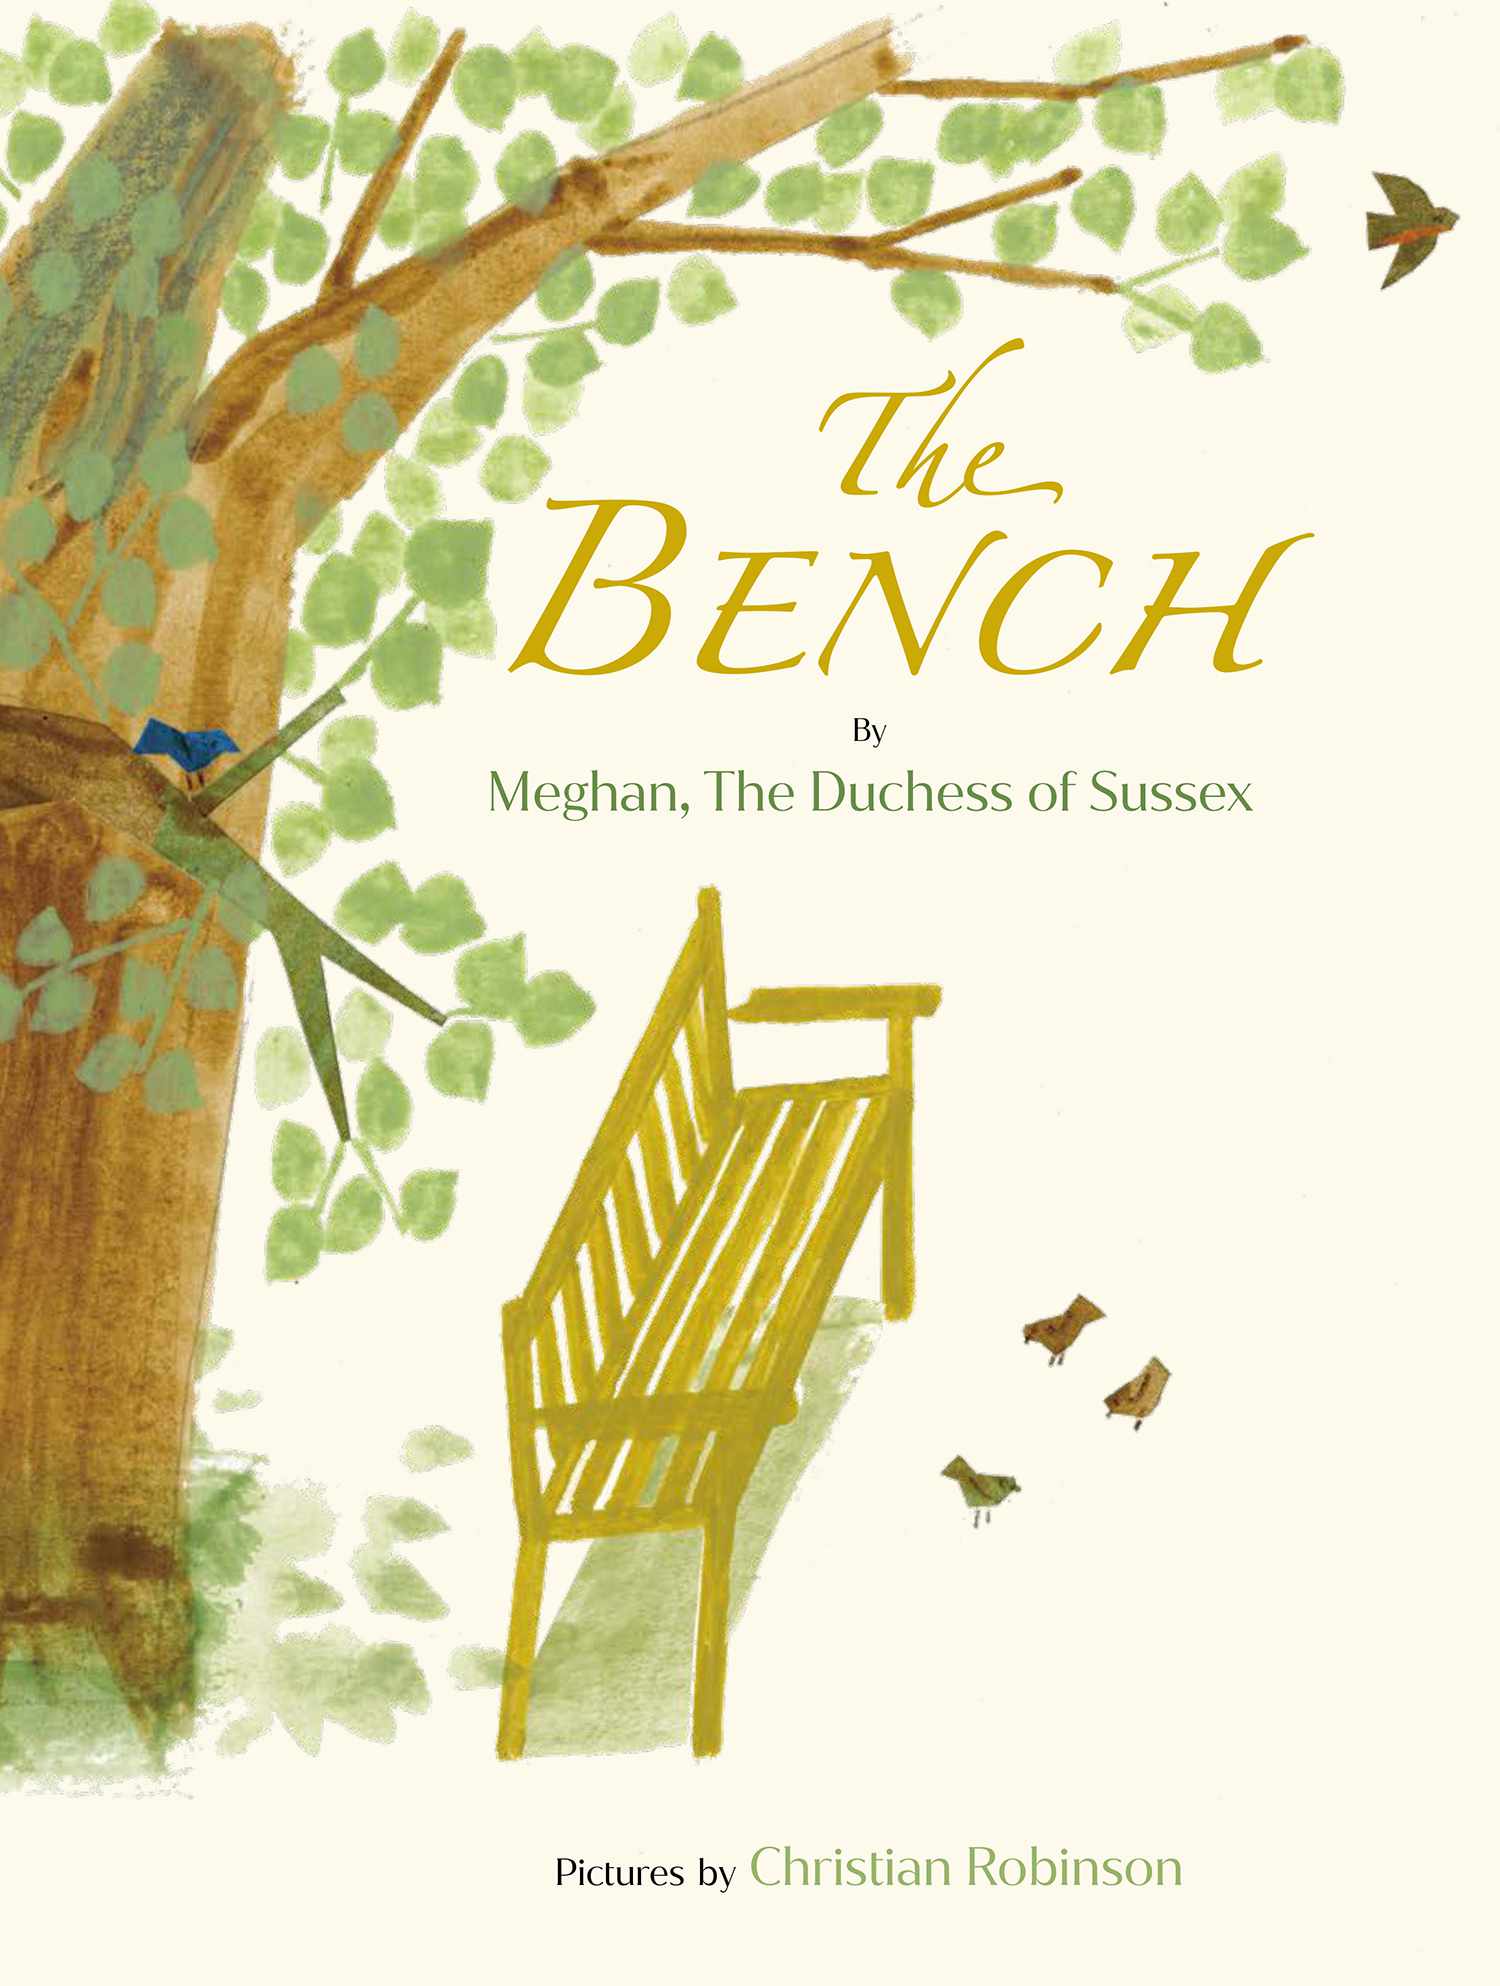 Meghan Markle's new children's book, The Bench